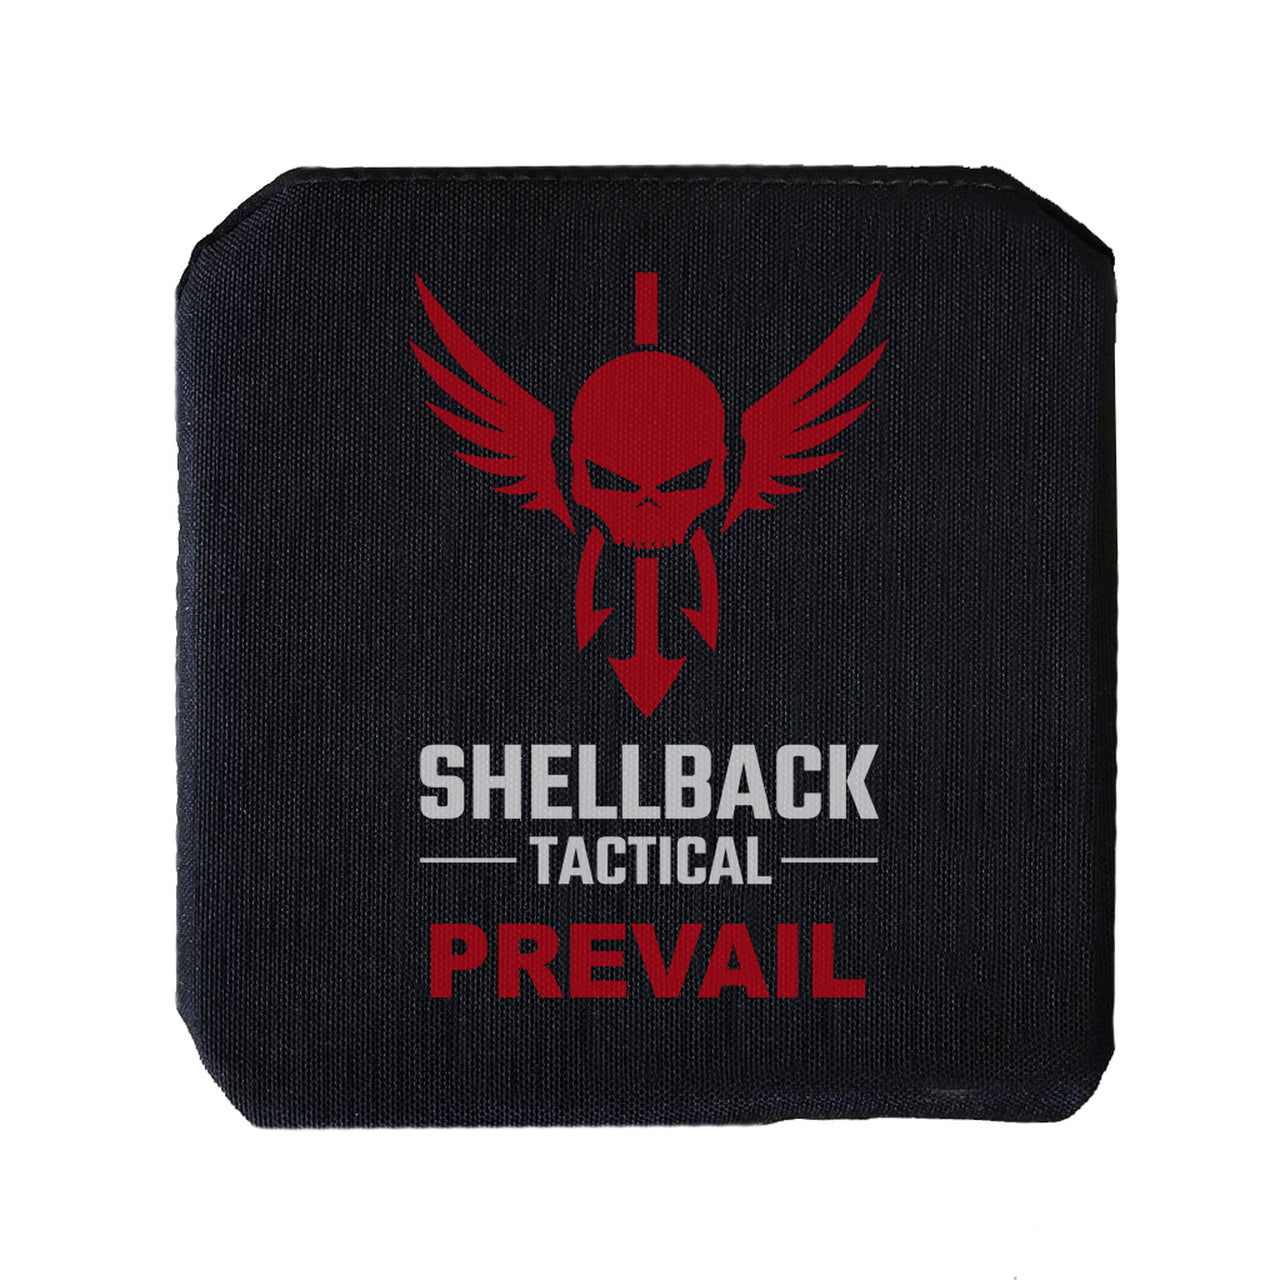 Shellback Tactical Prevail Series Level IV Single Curve 6 x 6 Hard Armor Plate - Model 4S17 shellback tactical prevail coaster.